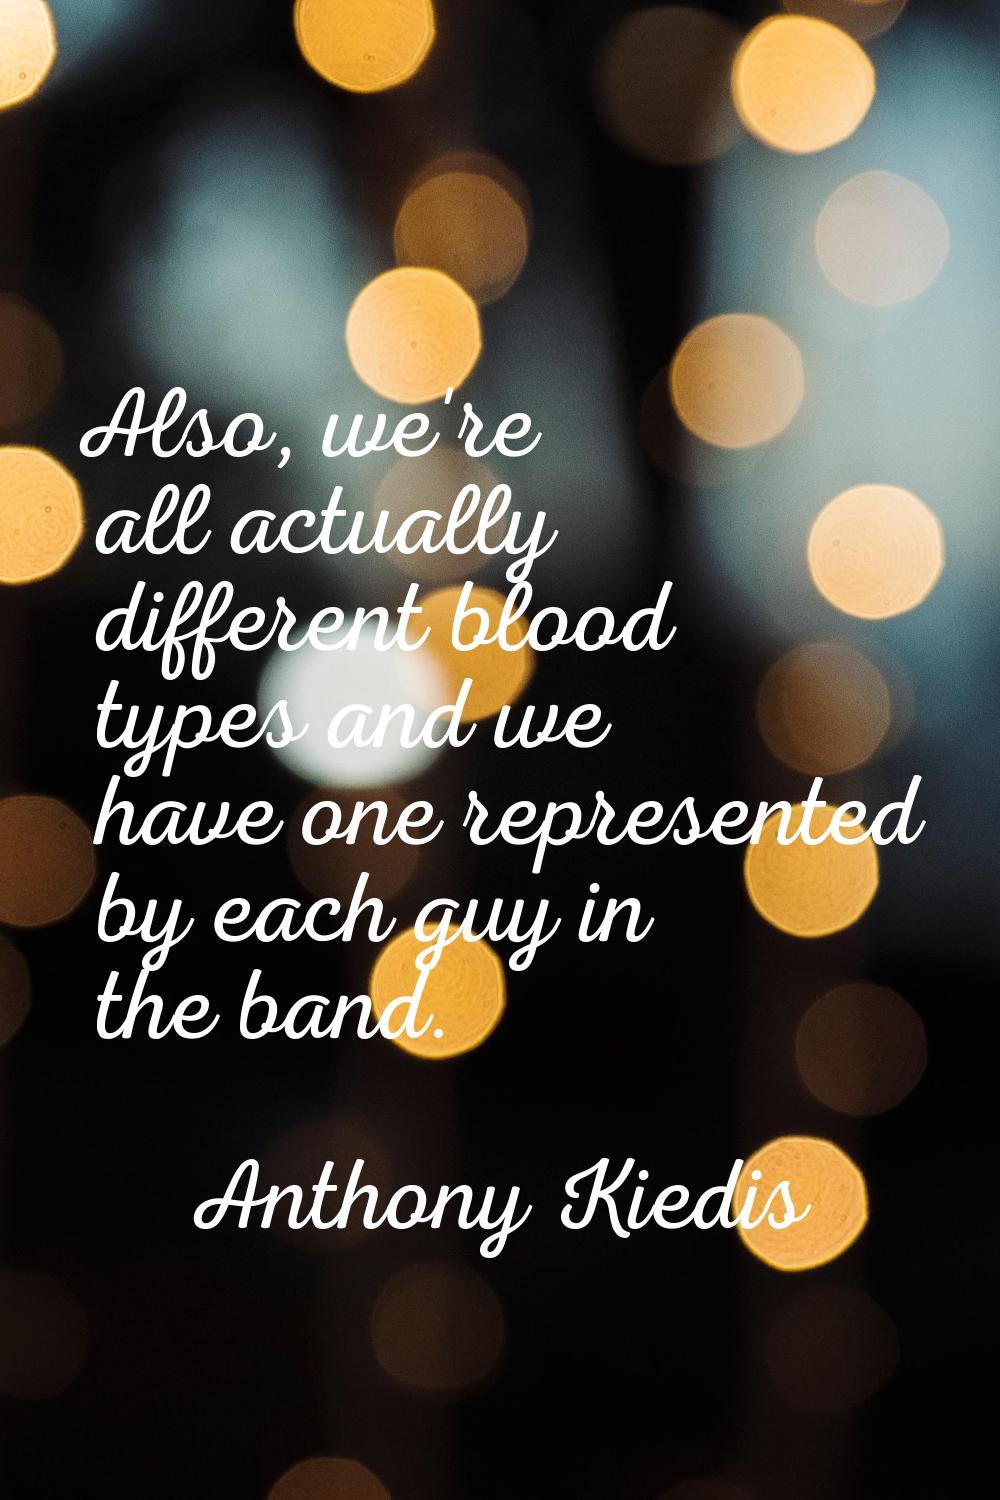 Also, we're all actually different blood types and we have one represented by each guy in the band.